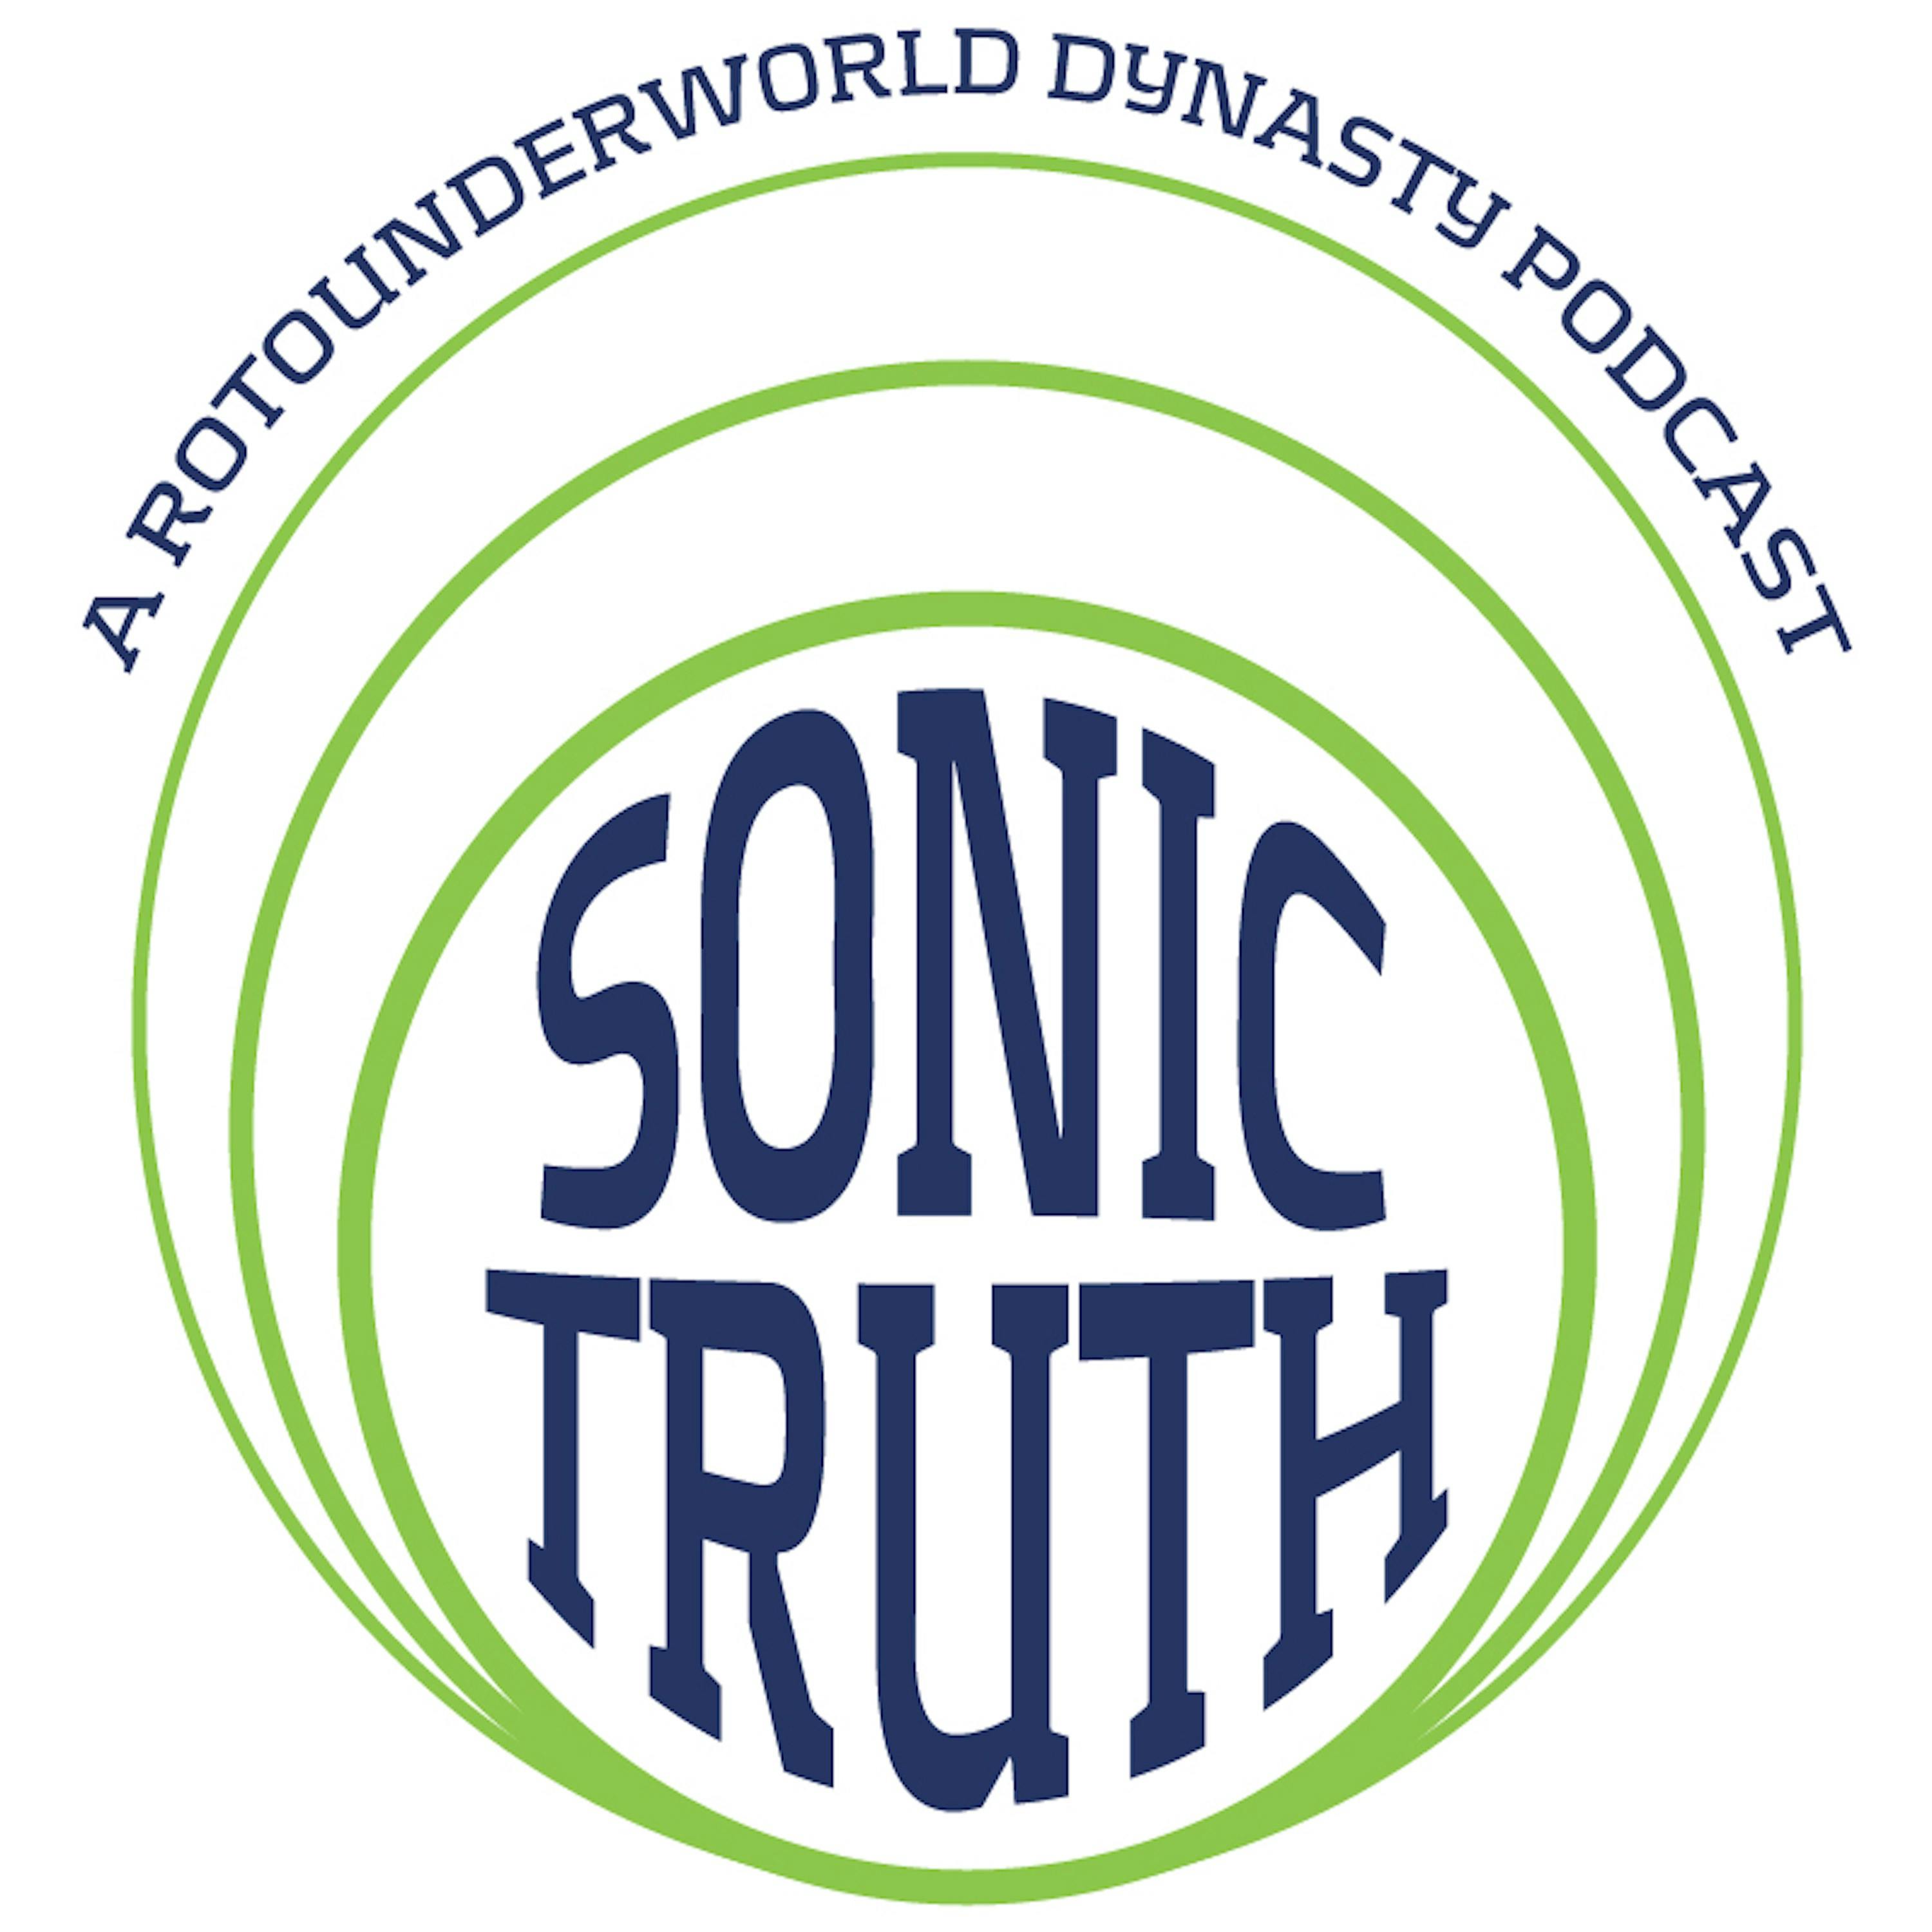 Sonic Truth - Rashee Rice and Trading for Distressed Assets in Dynasty Leagues